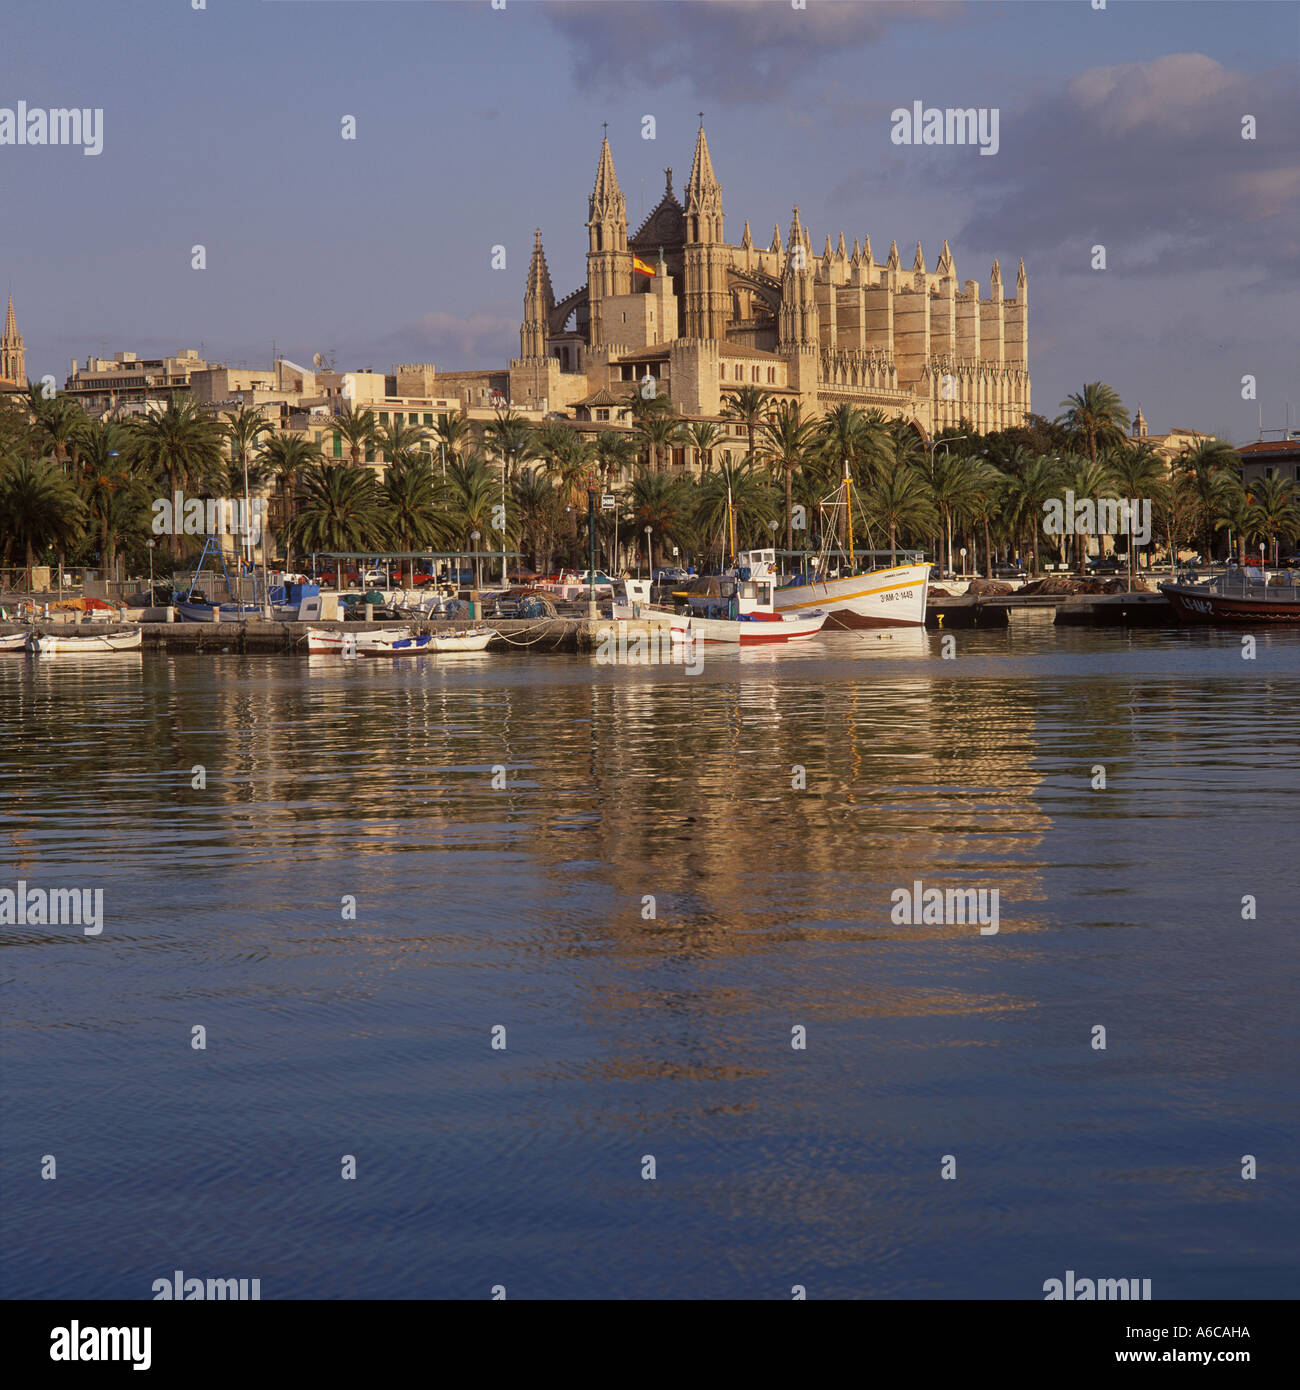 Palma Cathedral viewed over old fishing port (Muelle Viejo - Old Quay ), Palma de Mallorca, Balearic Islands, Spain. Stock Photo